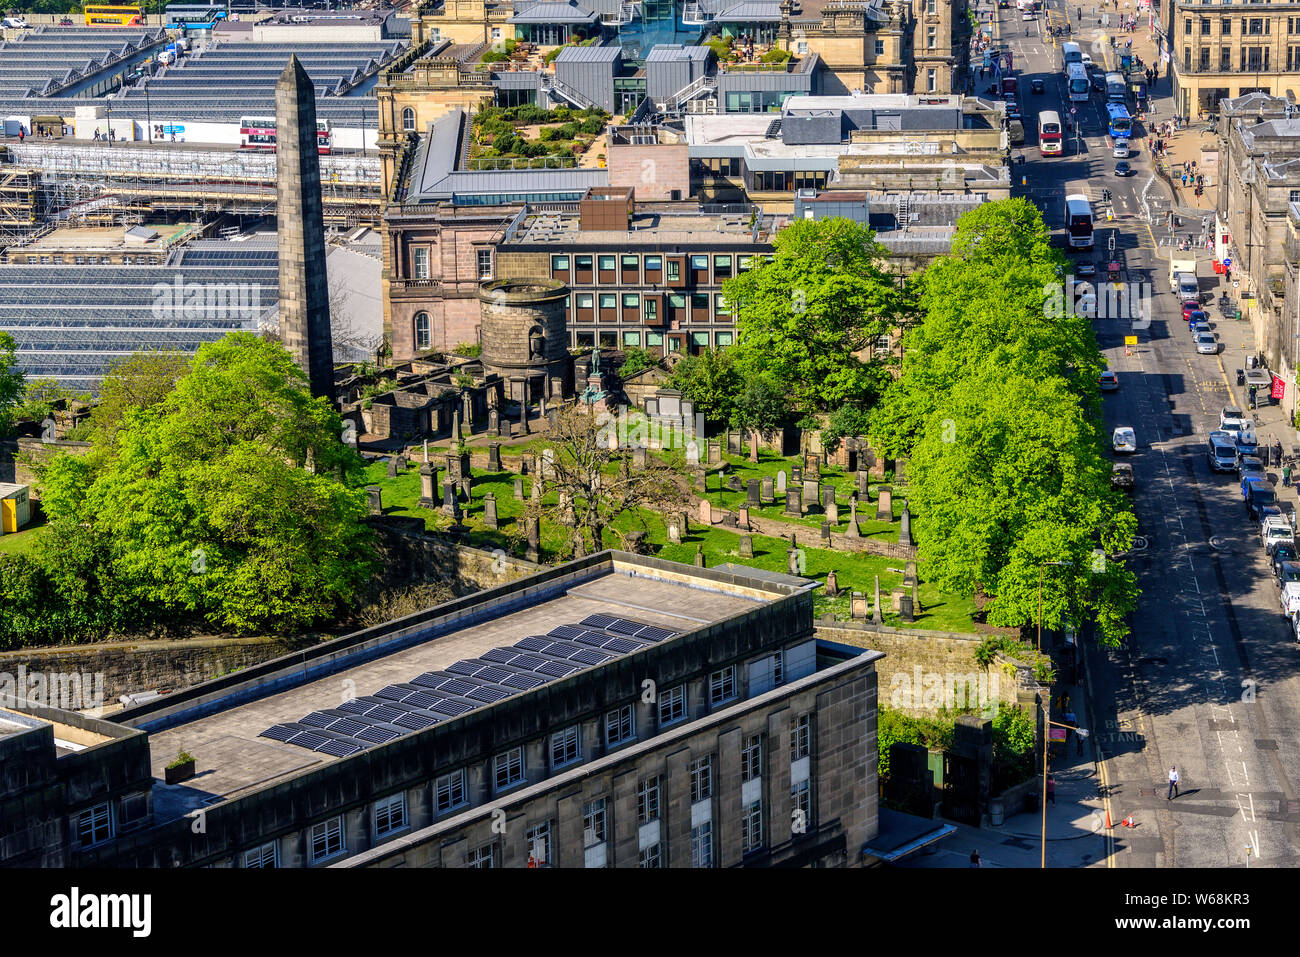 Edinburgh, Scotland - May 13, 2019:  The Old Calton Burial Ground is a graveyard at Calton Hill, in Edinburgh, to the north-east of the city centre. Stock Photo